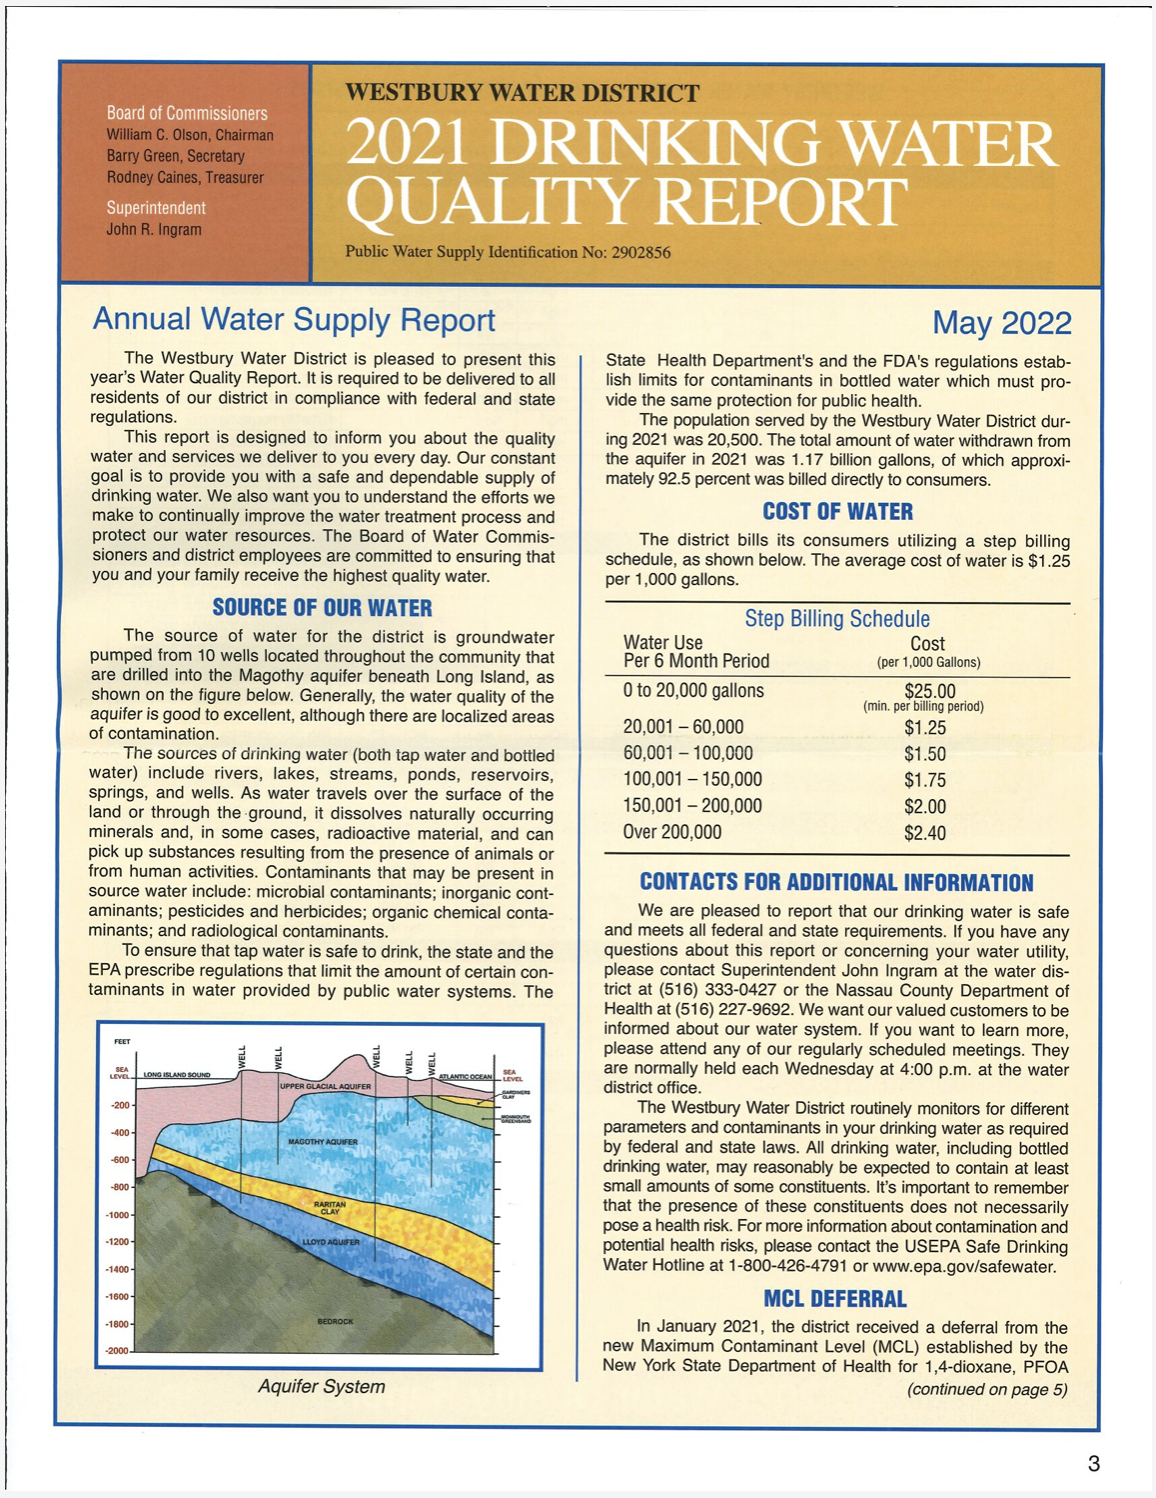 2021 Water Quality Report